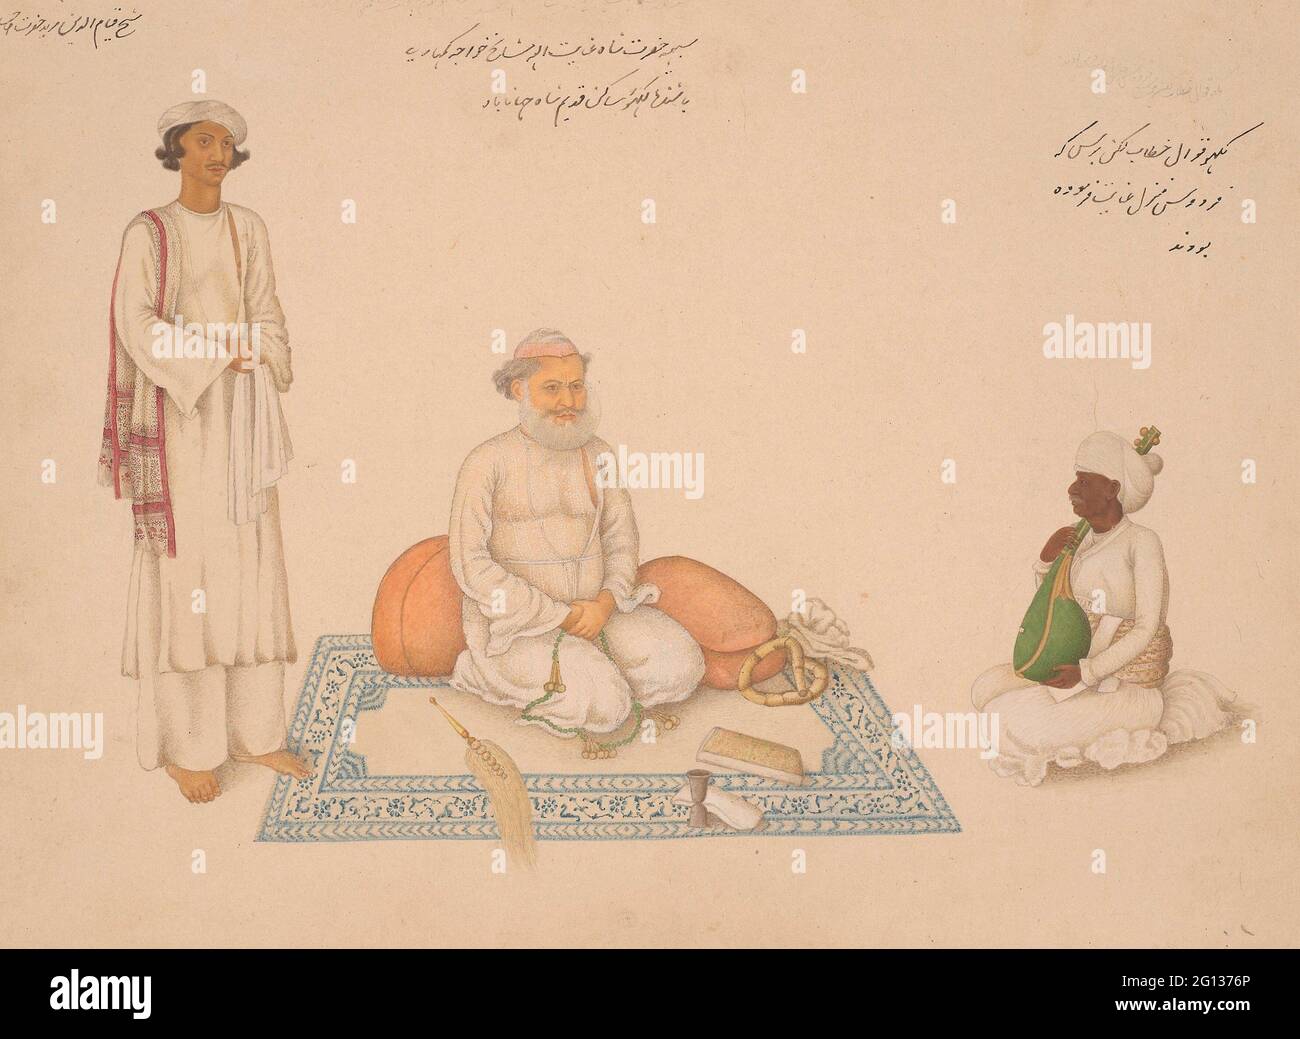 Shah Inayat Allah of Sind with his Musician Makkhu and his Attendant Shaykh Qiyam al-Din, page from the Fraser Album - Company School, c. 1820 - Stock Photo